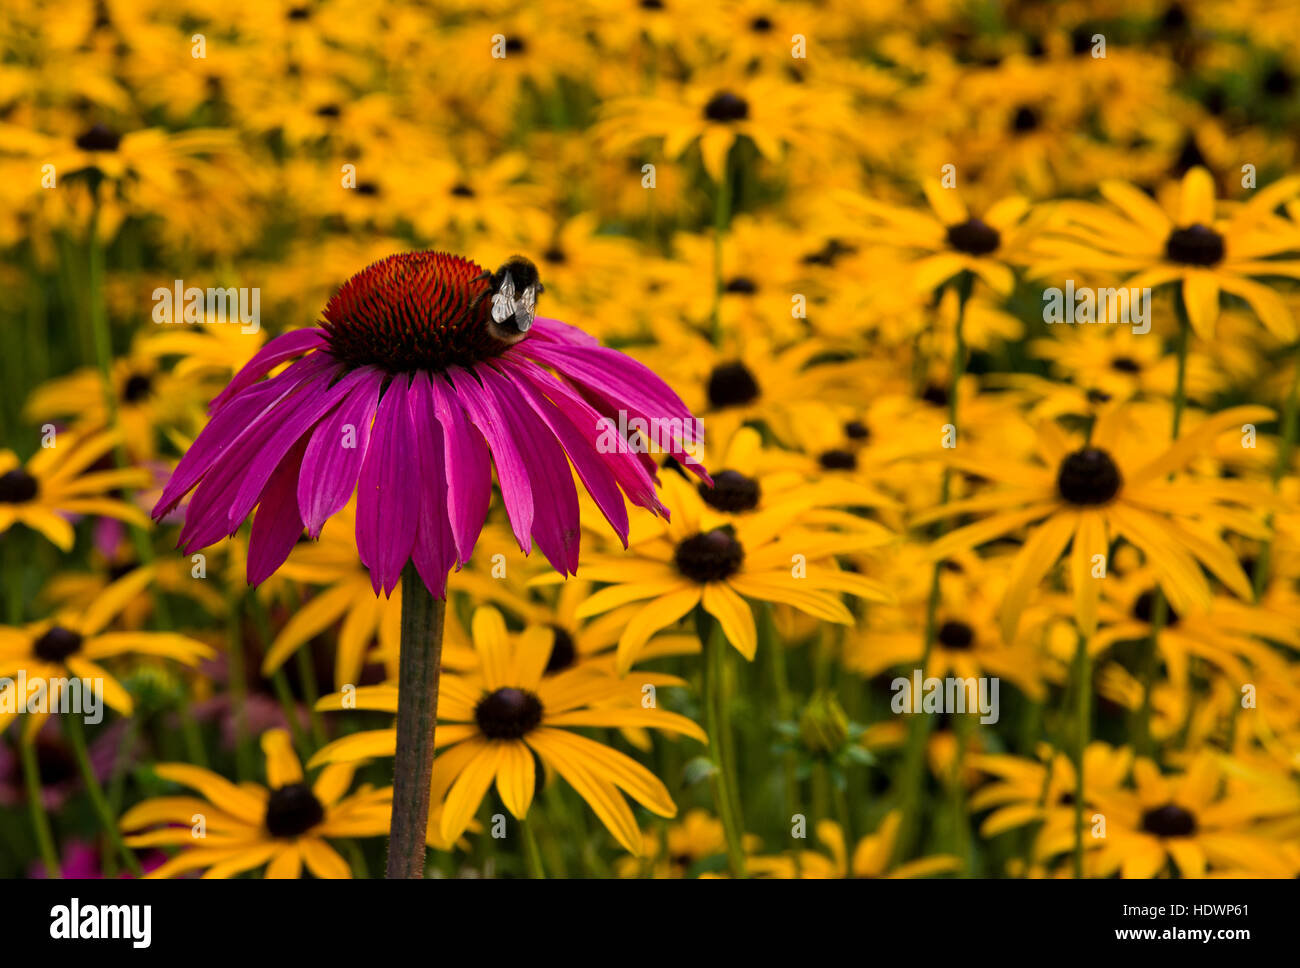 Coneflower (Echinacea purpurea) in the foreground and pink yellow perennial, Rudbeckia Goldsturn in the background. Stock Photo